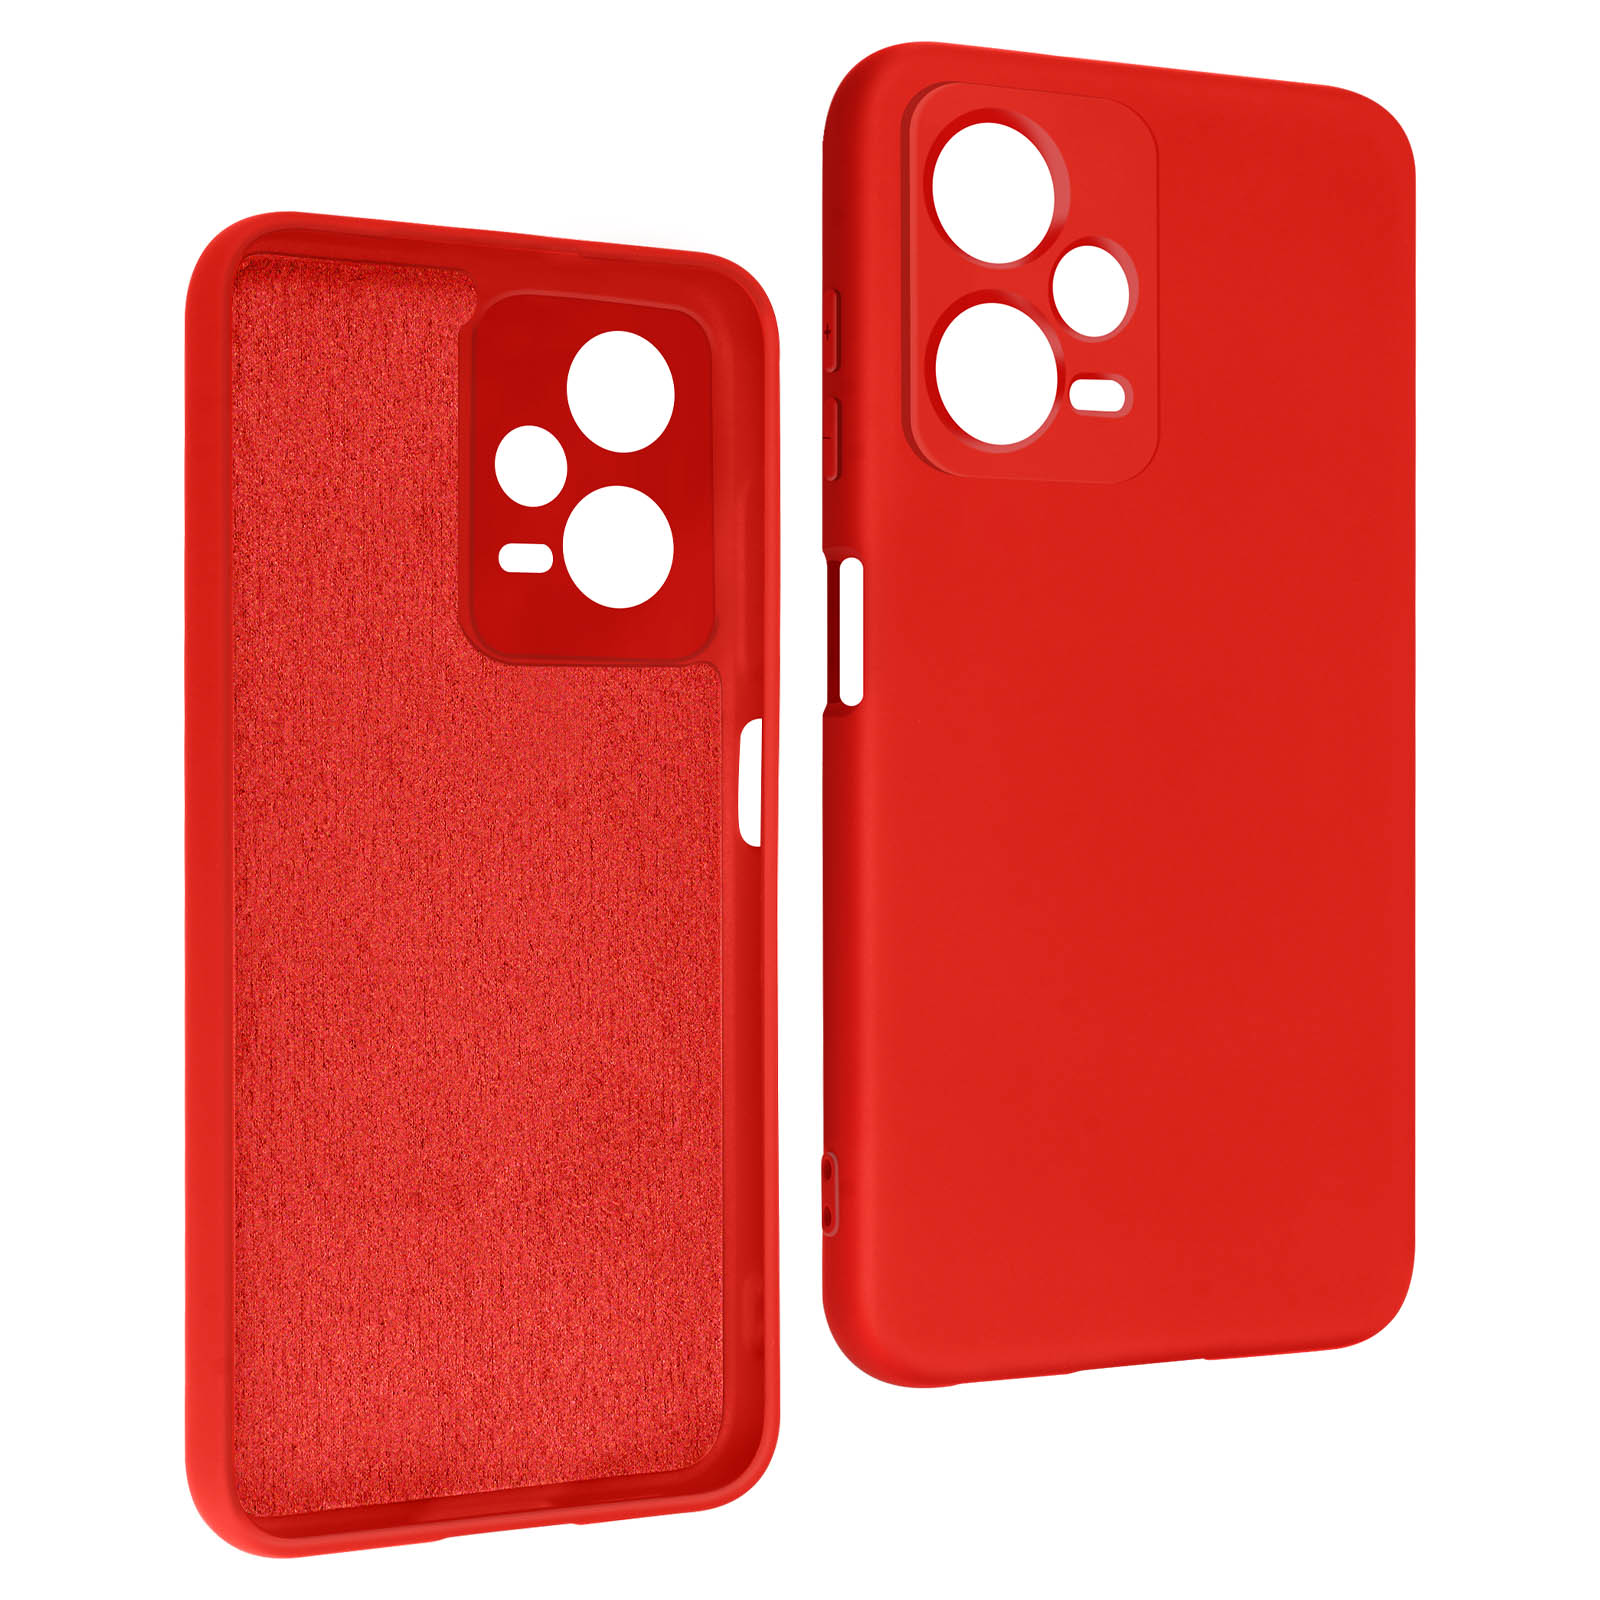 AVIZAR Likid Series, Backcover, Pro Rot 5G, 12 Redmi Note Xiaomi